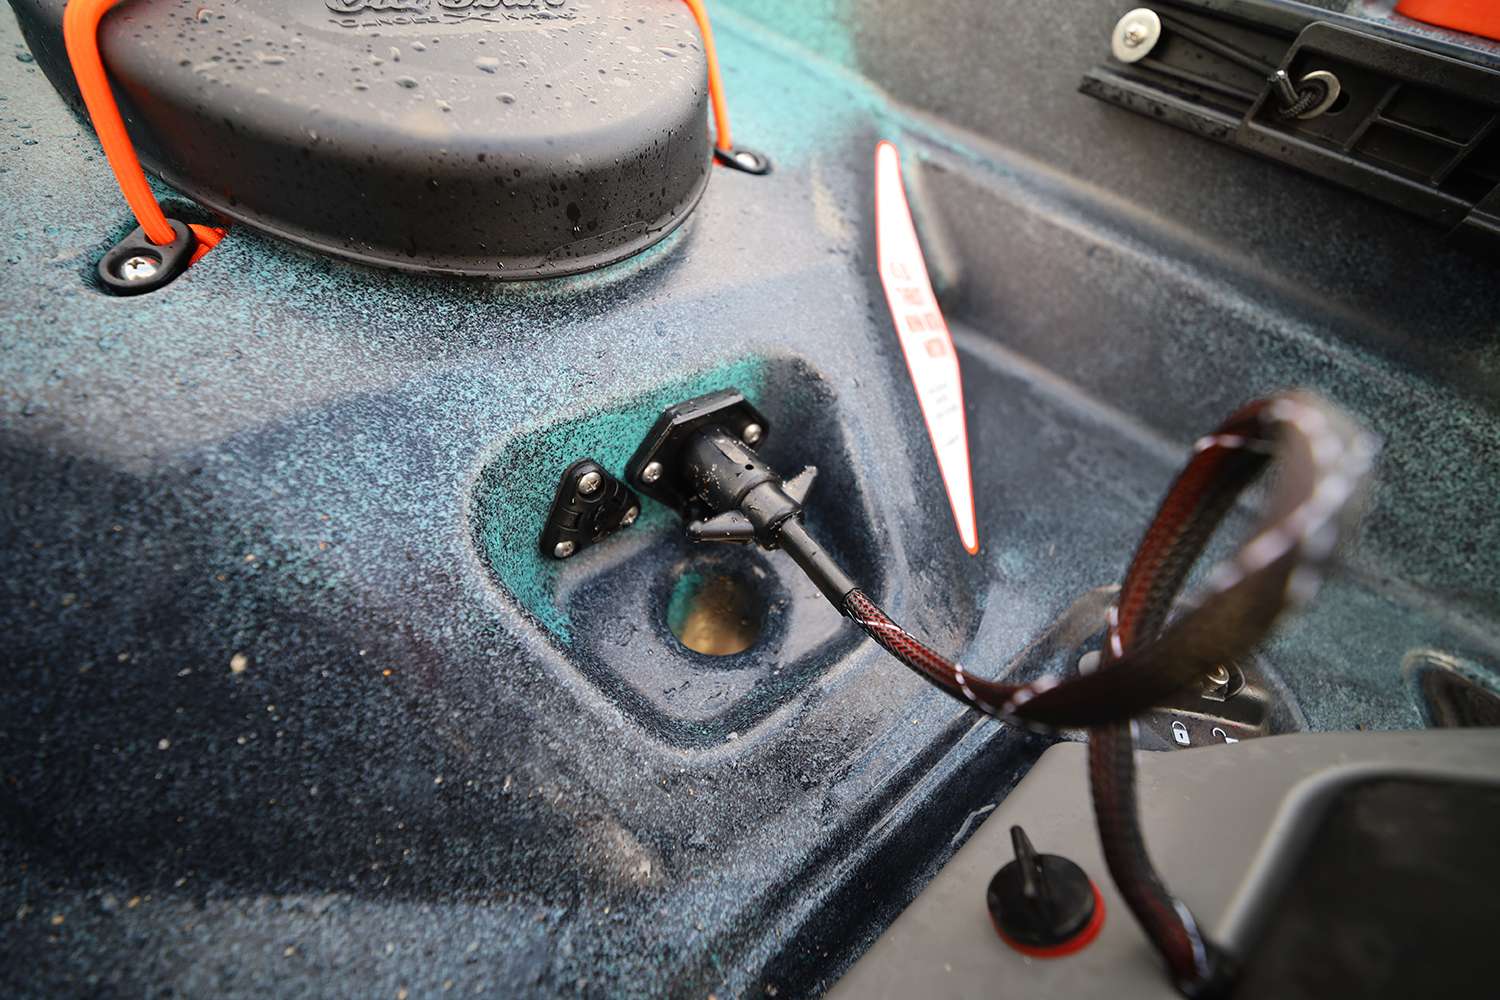 This is where the power supply is accessed, and the scupper hole is where wires from the fishfinder transducer are run.